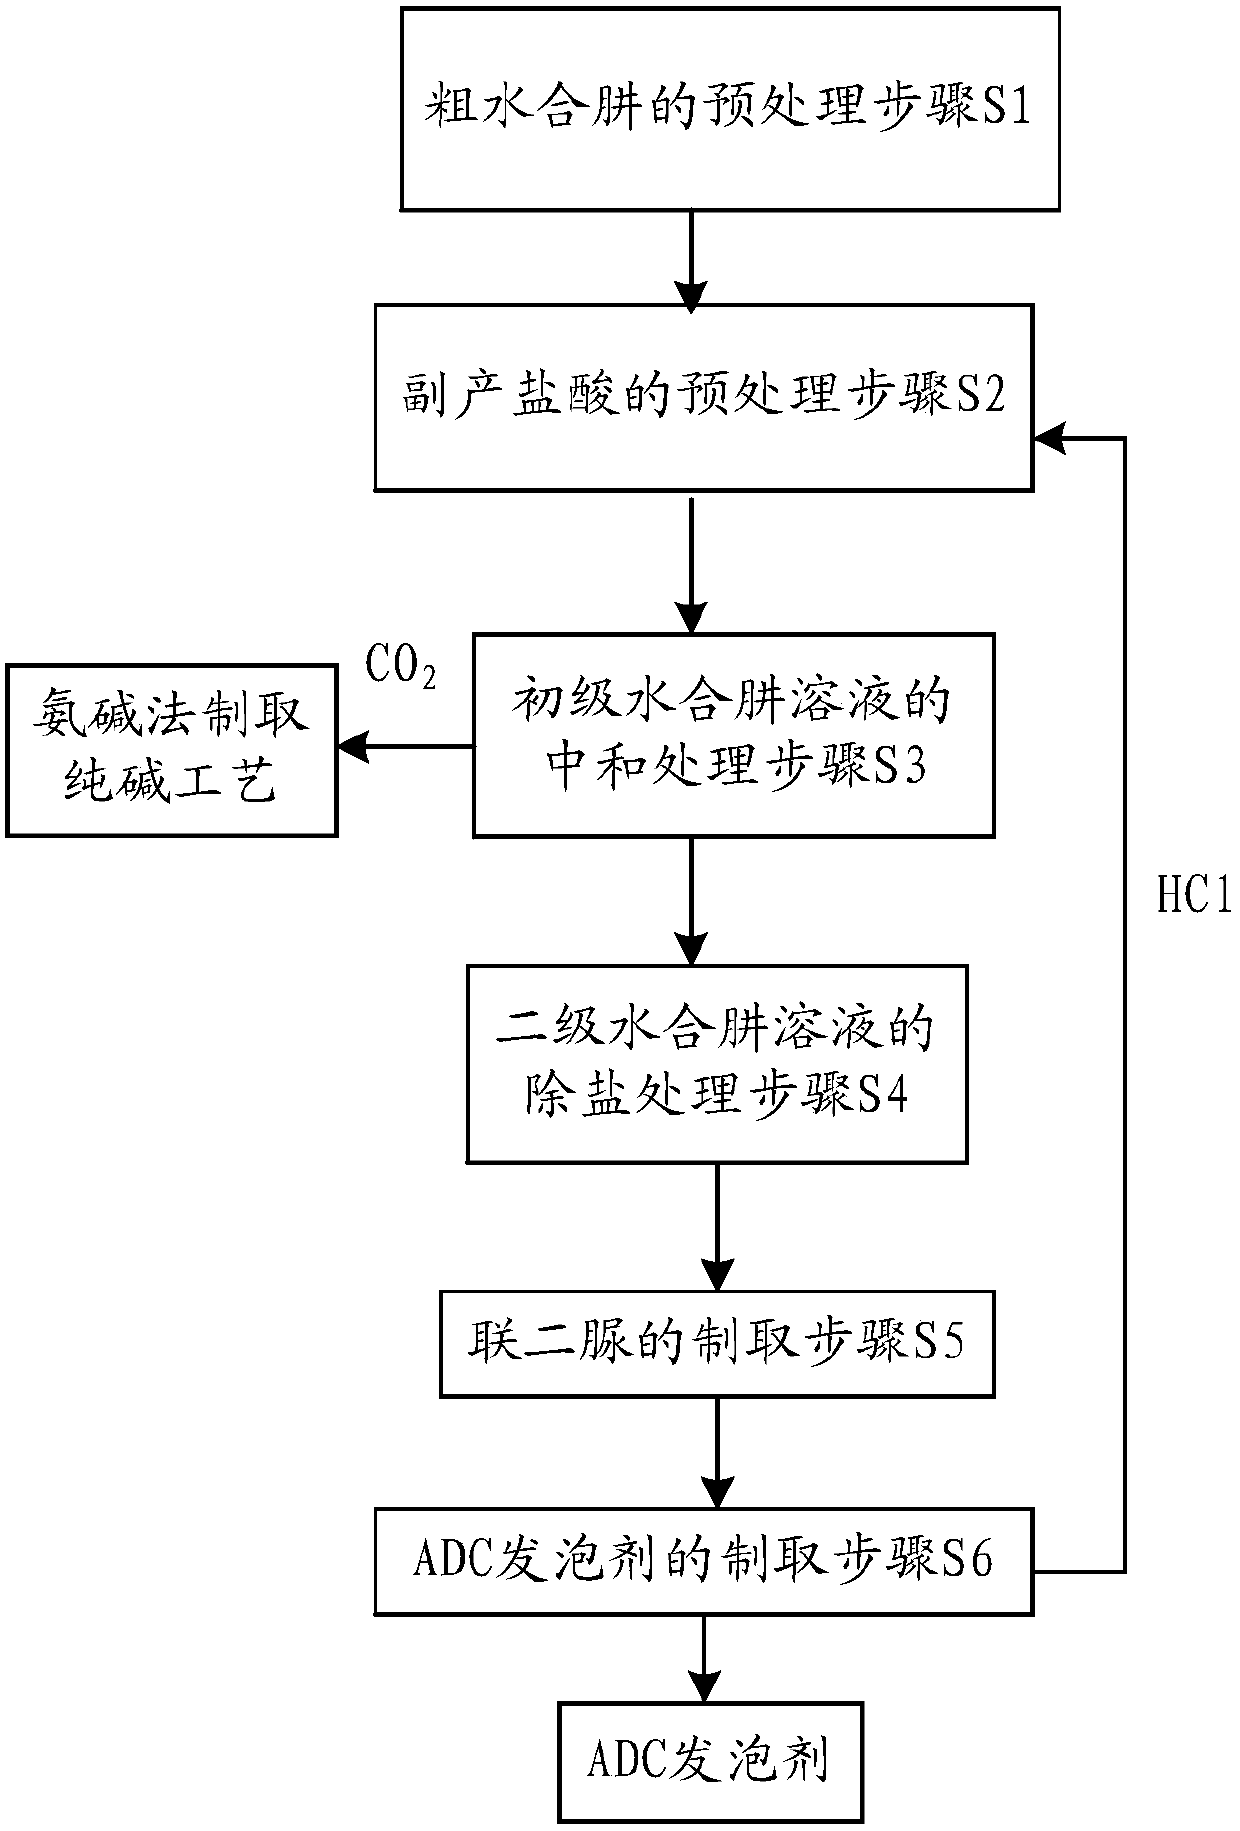 A method for recovering and utilizing by-product hydrochloric acid in the process of preparing ADC blowing agent